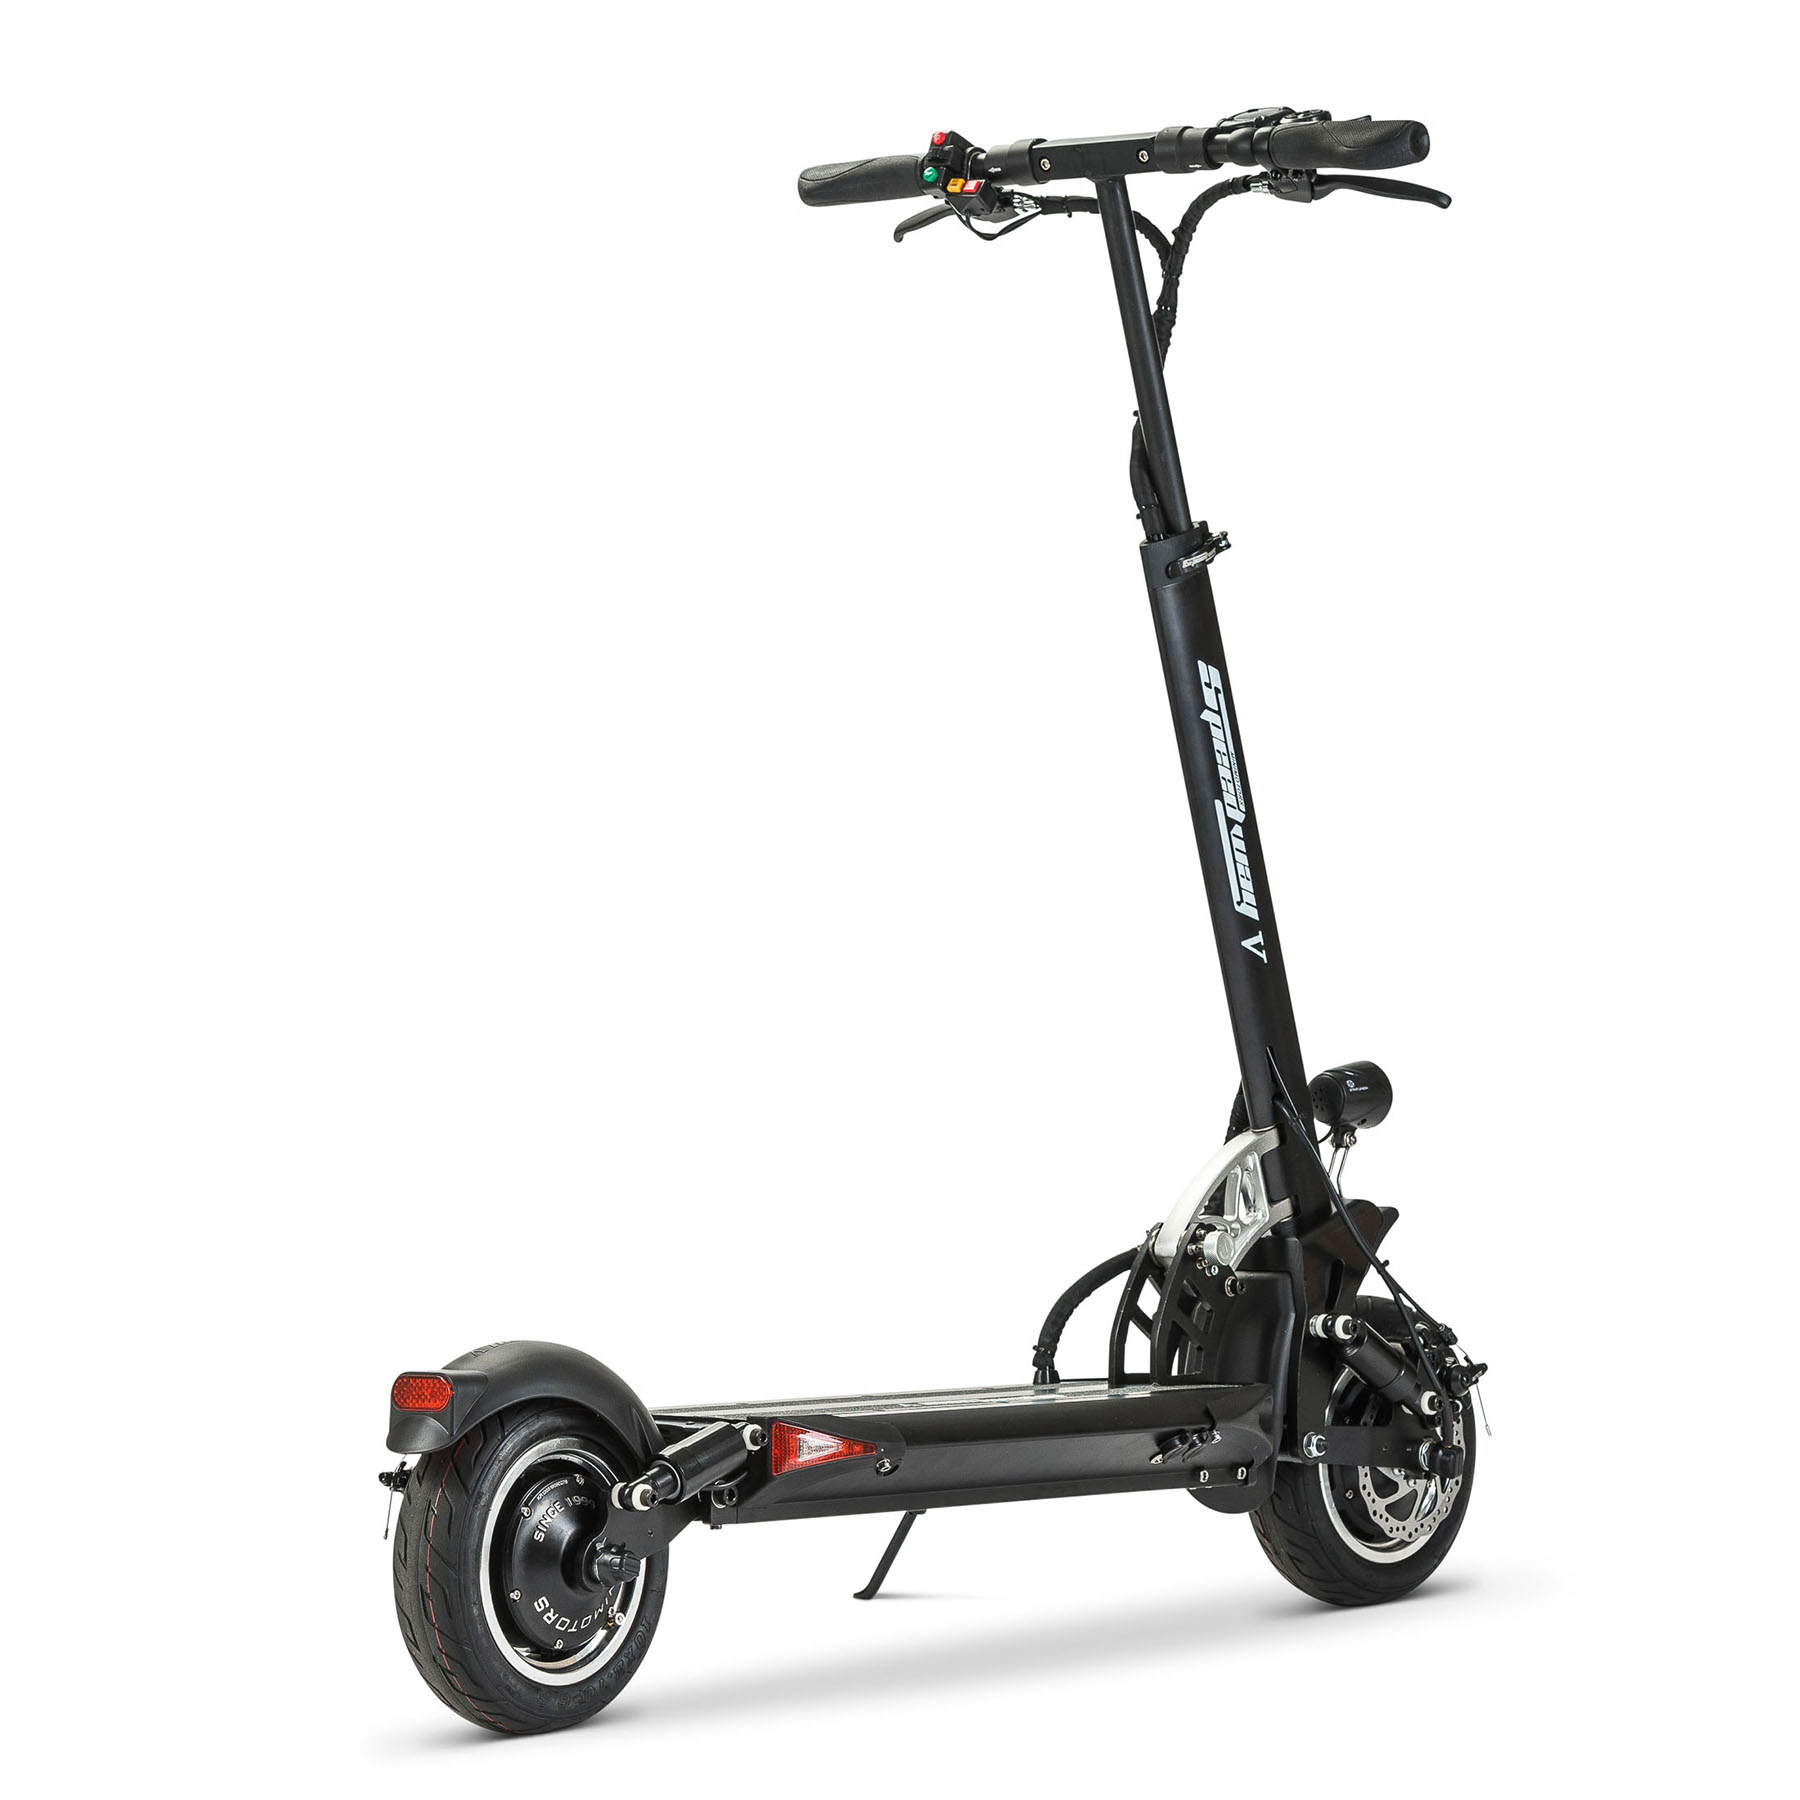 Speedway 5 The Speedway 5 is a electric scooter that packs a punch in price and stats and is foldable. The 1800Ww (or 3600W) motor makes it the perfect scooter for hilly roads or when you need some extra power. Both versions of the Speedway 5 can go up to 55 km/h when unlocked and have both suspension on the front and back. The magnetic (motorbrakes) and diskbrakes make sure you come to a complete stop in a matter of seconds.